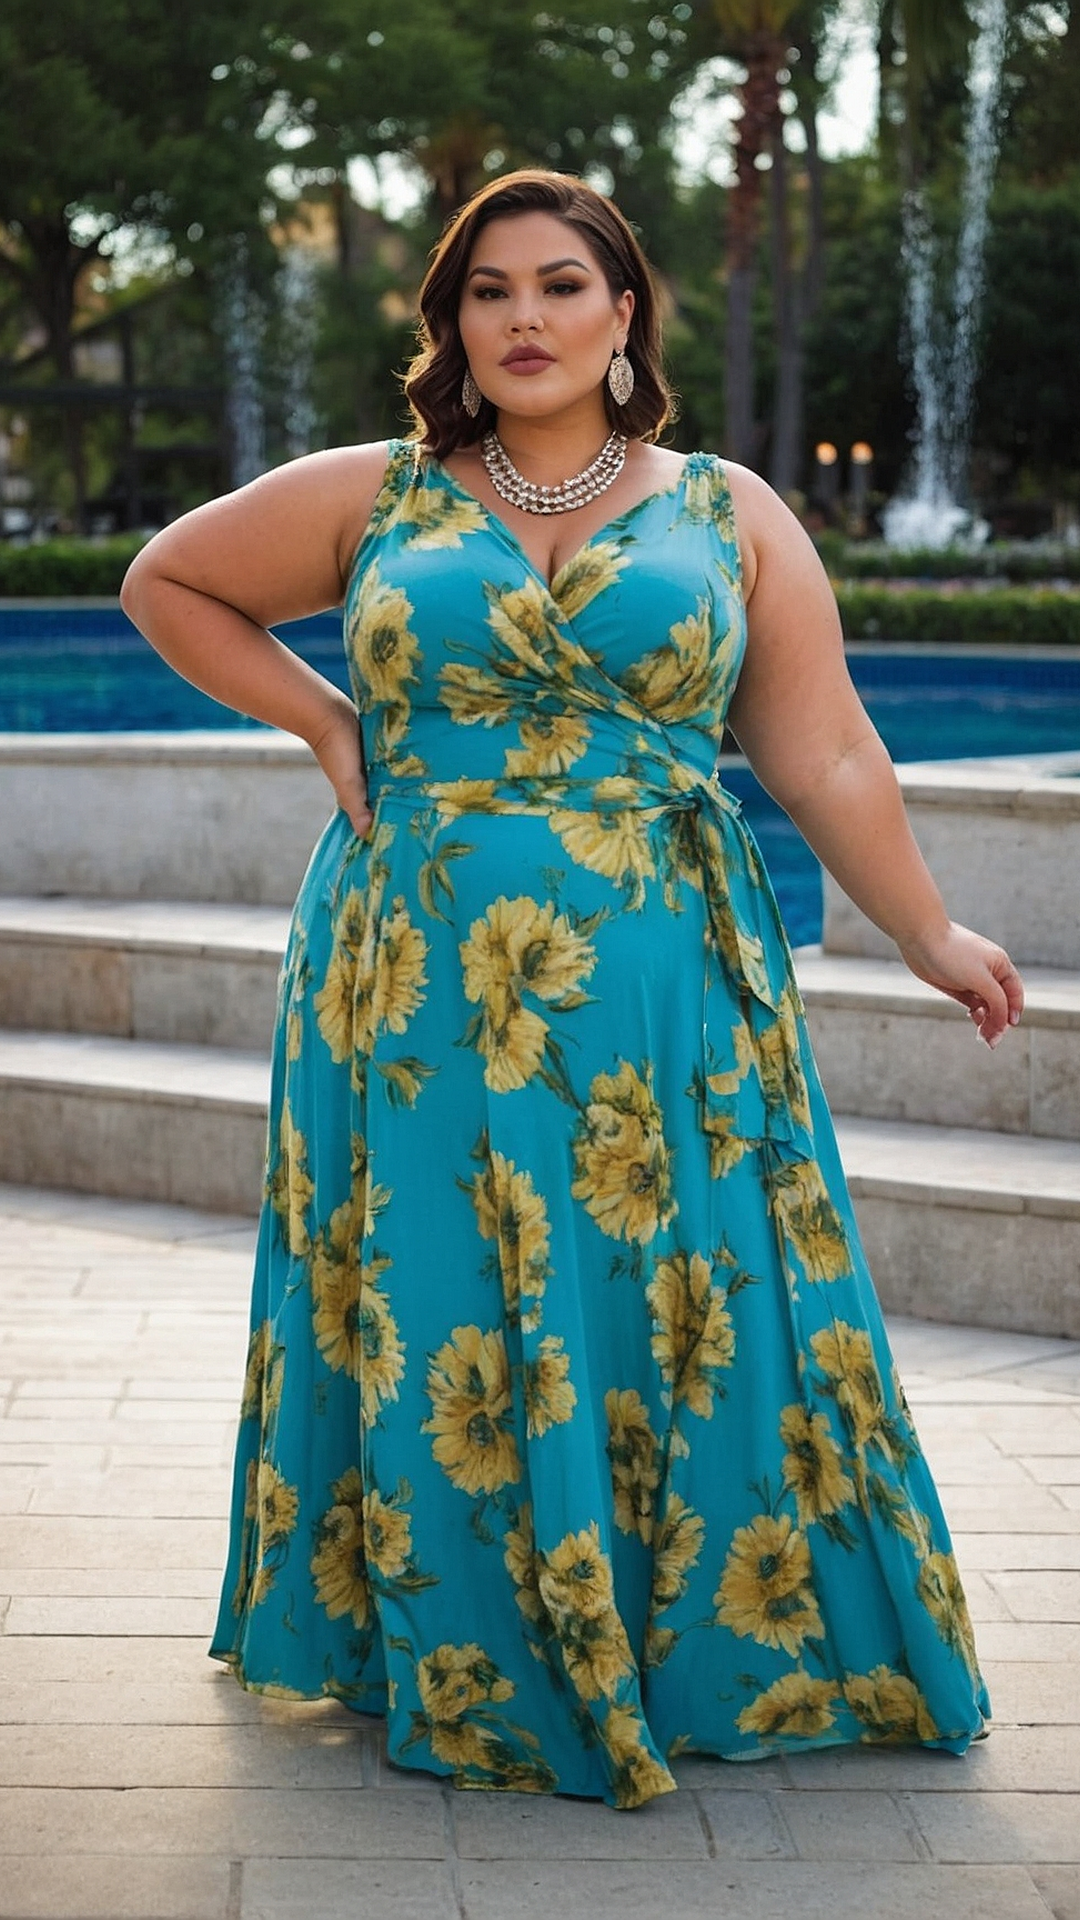 Cool and Casual: Plus Size Outfits for Summer Strolls